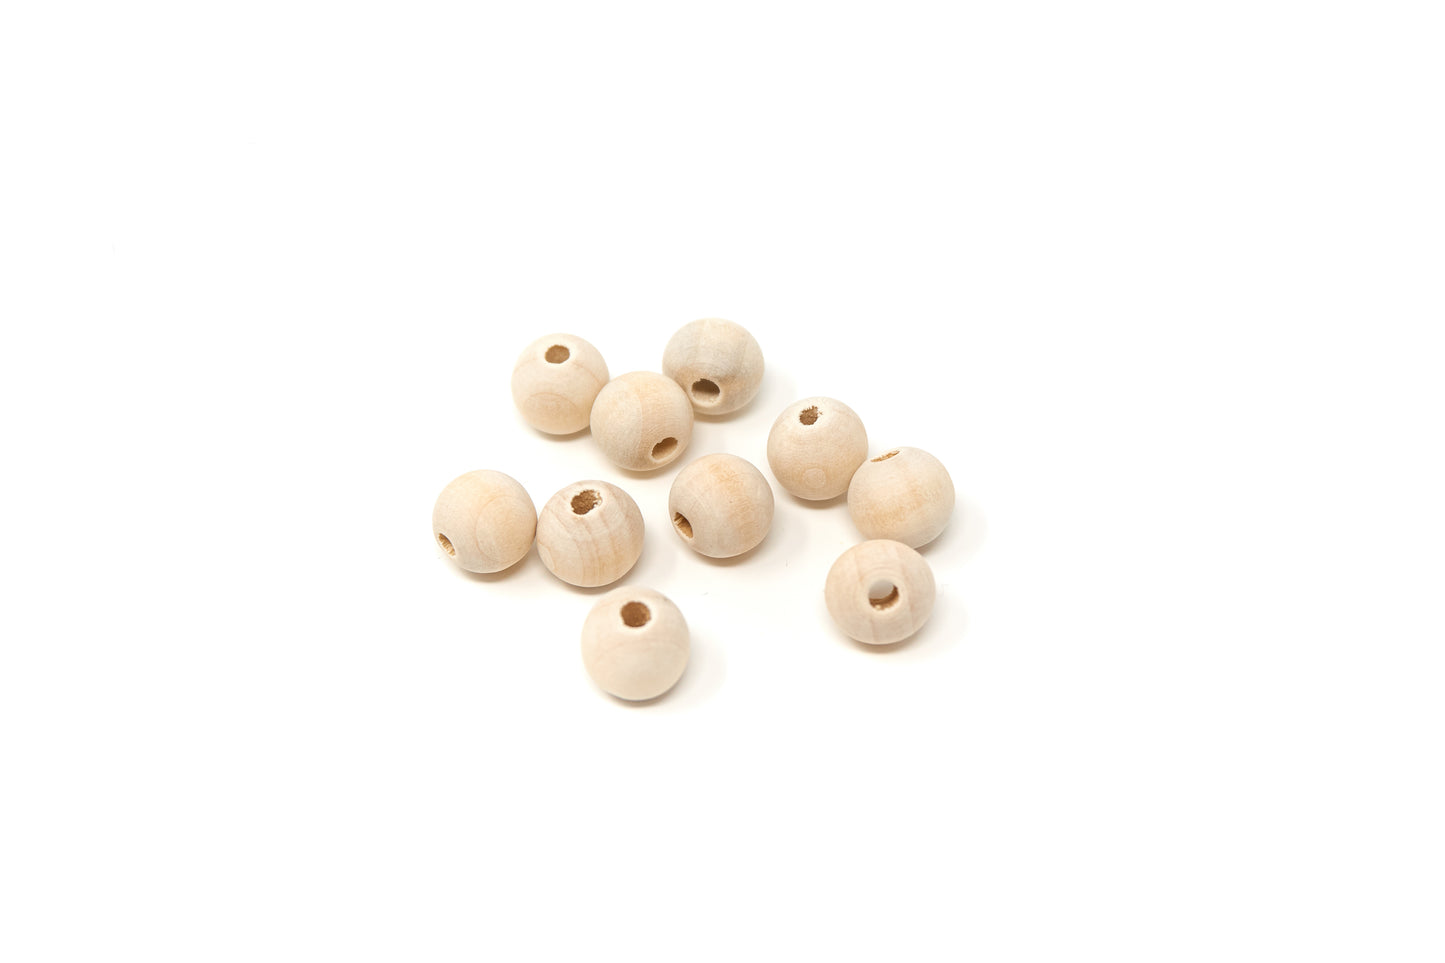 Natural Round Wood Beads 12mm 100 pieces - Cameos Art Shop